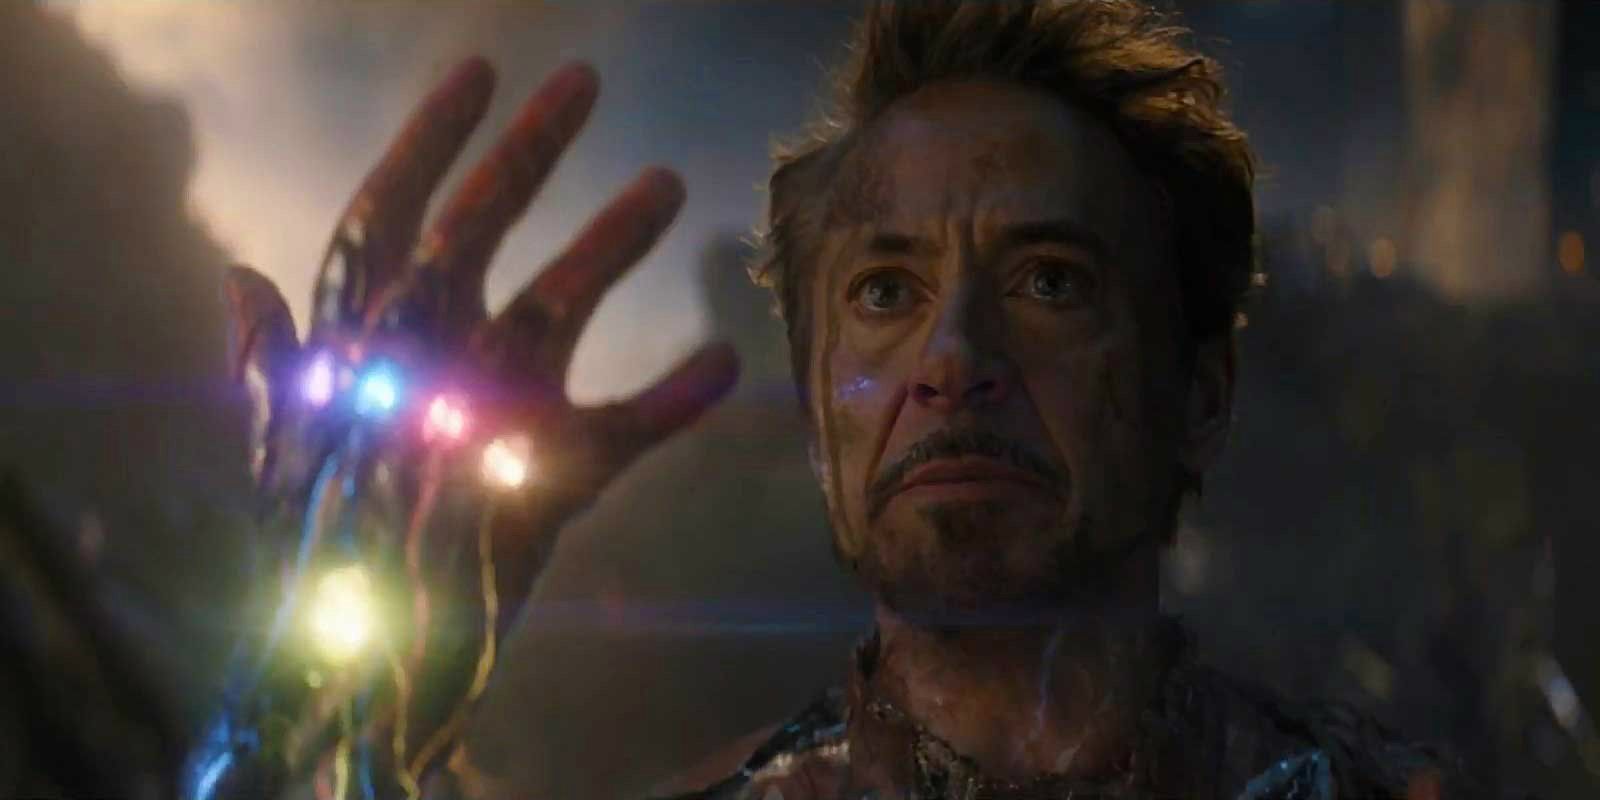 Iron Man using the Infinity Gauntlet in Avengers: Endgame